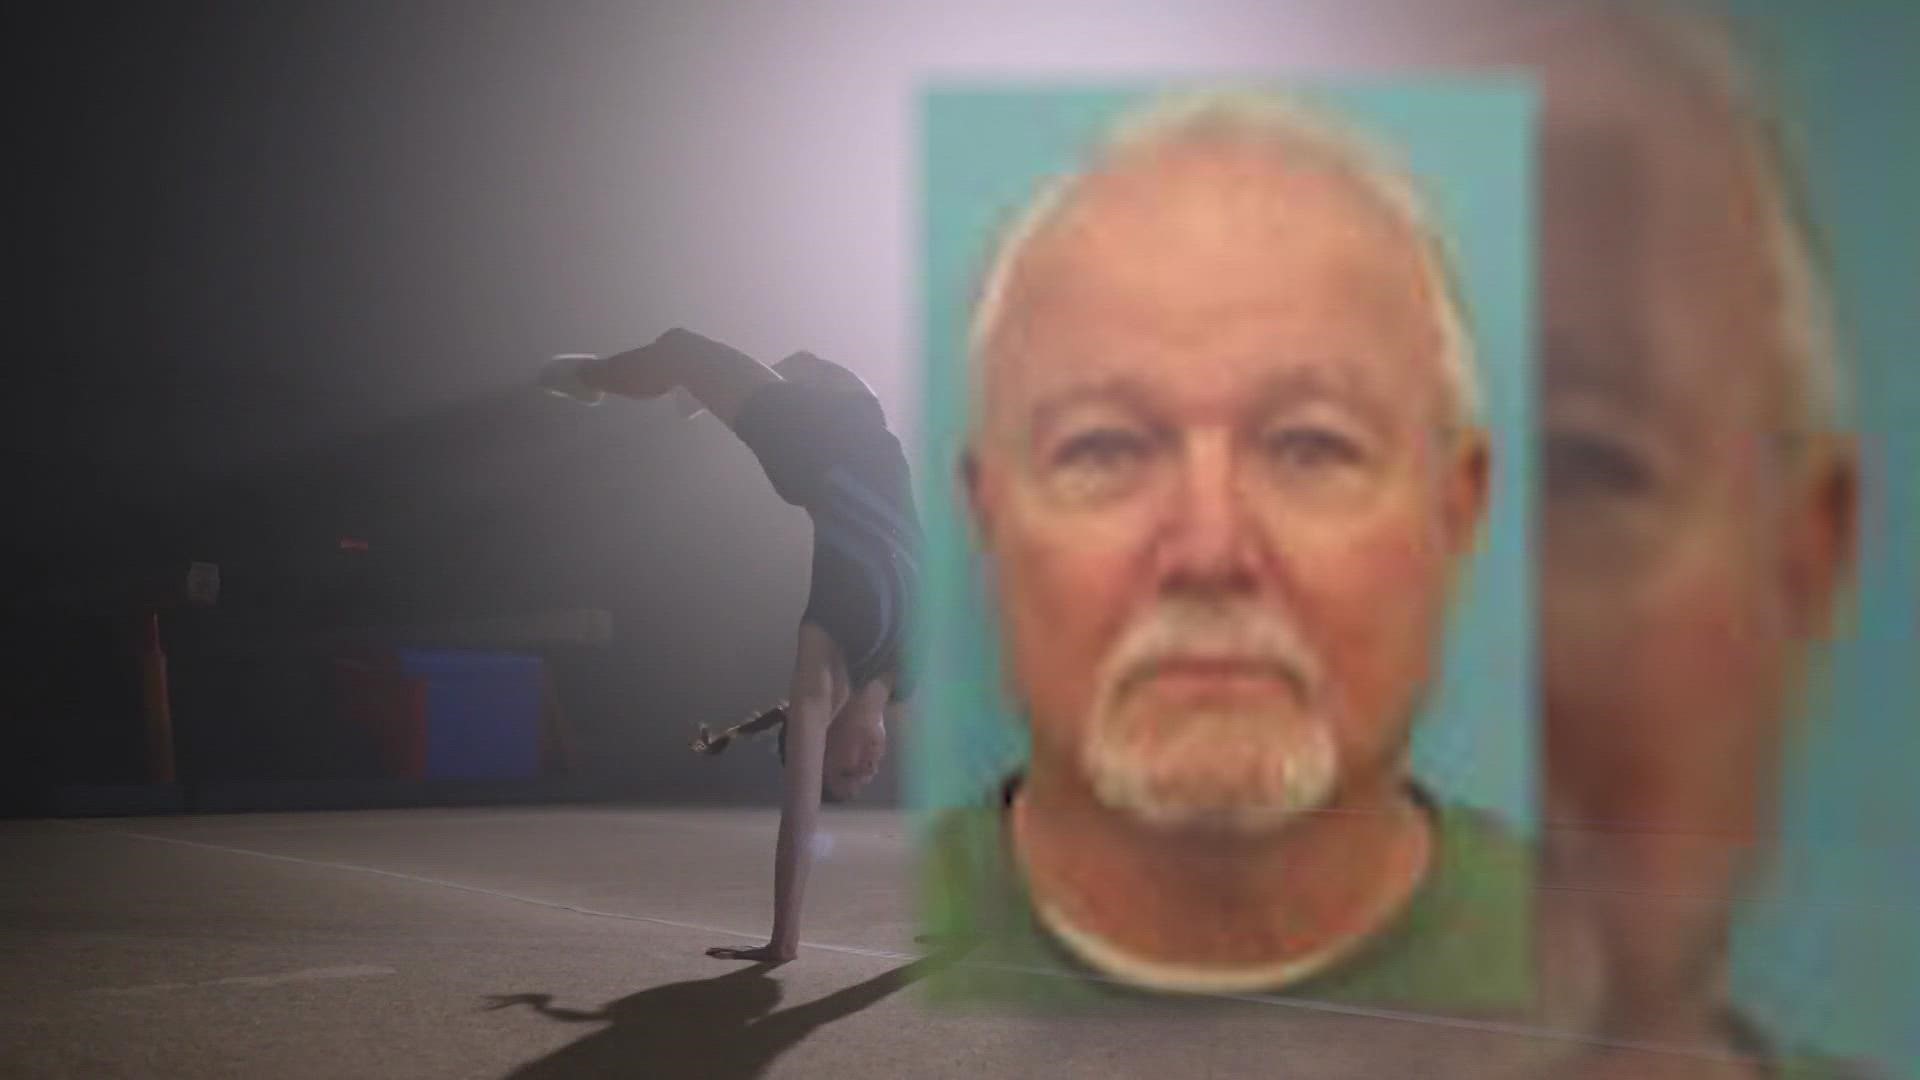 The nine-year-old girl alleges 74-year-old Mike Spiller put his hand inside her leotard during a practice at the Boerne Gymnastics Center in April.